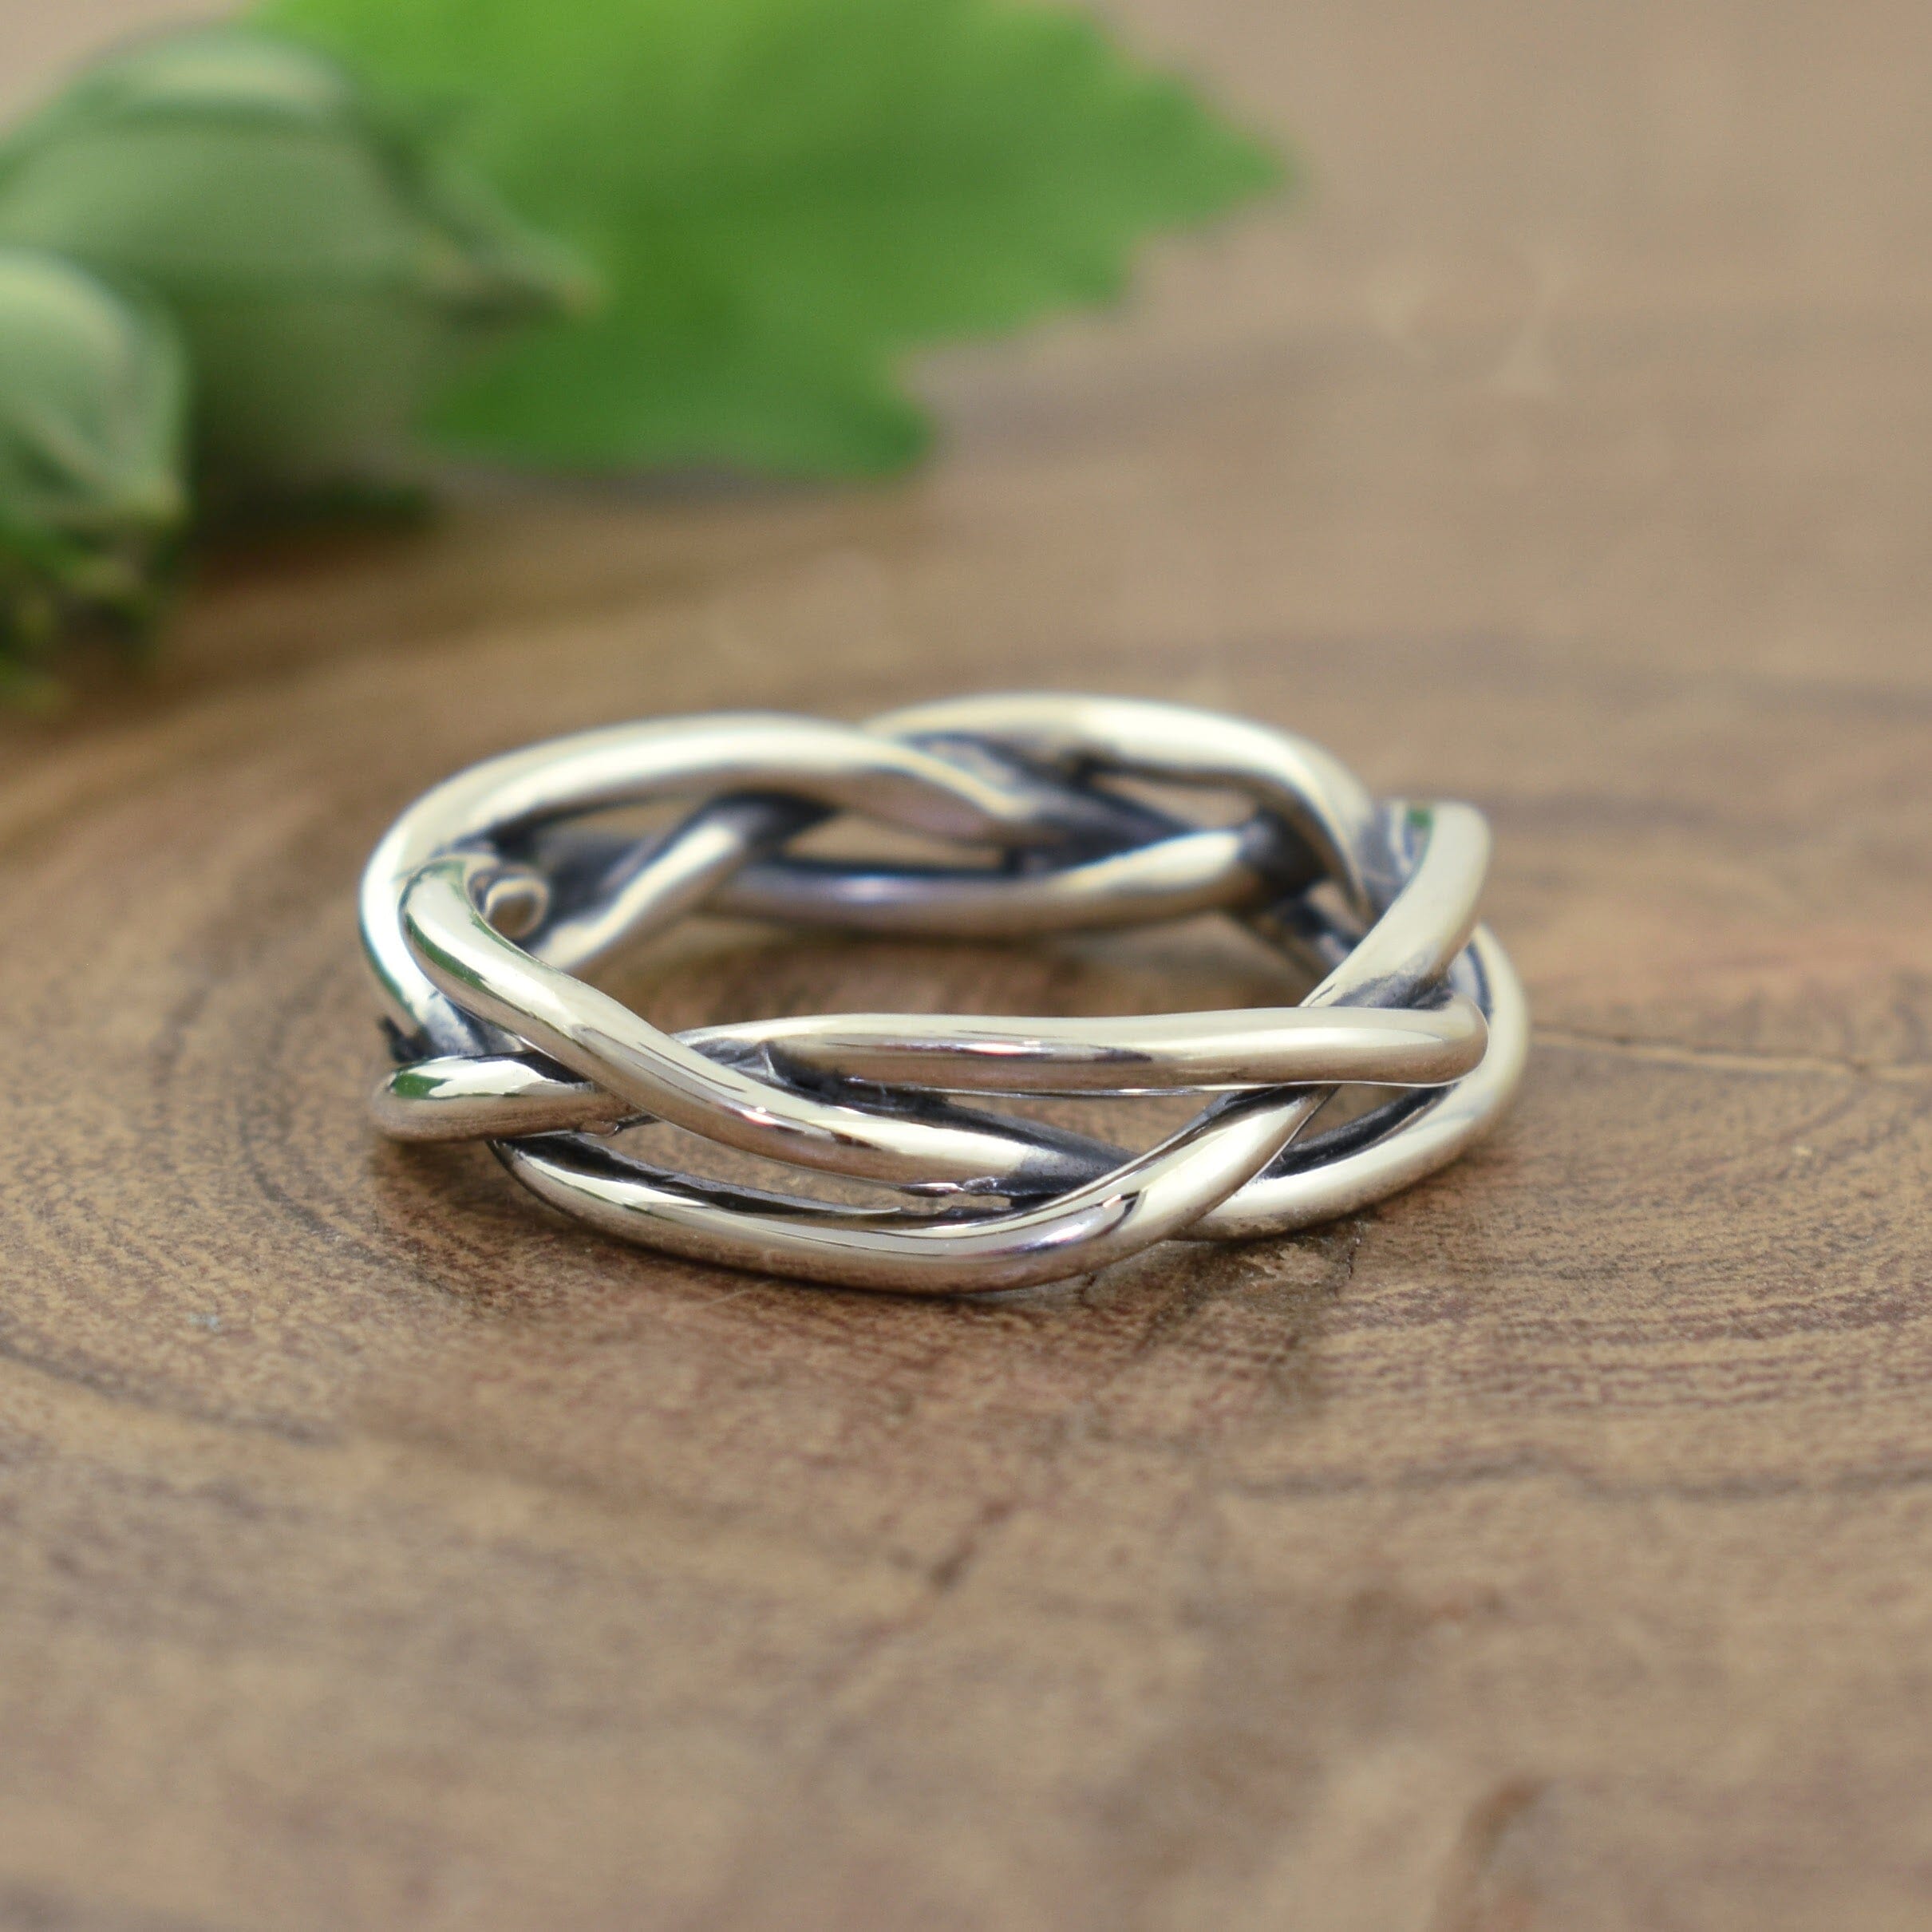 Twisted sterling silver stack ring